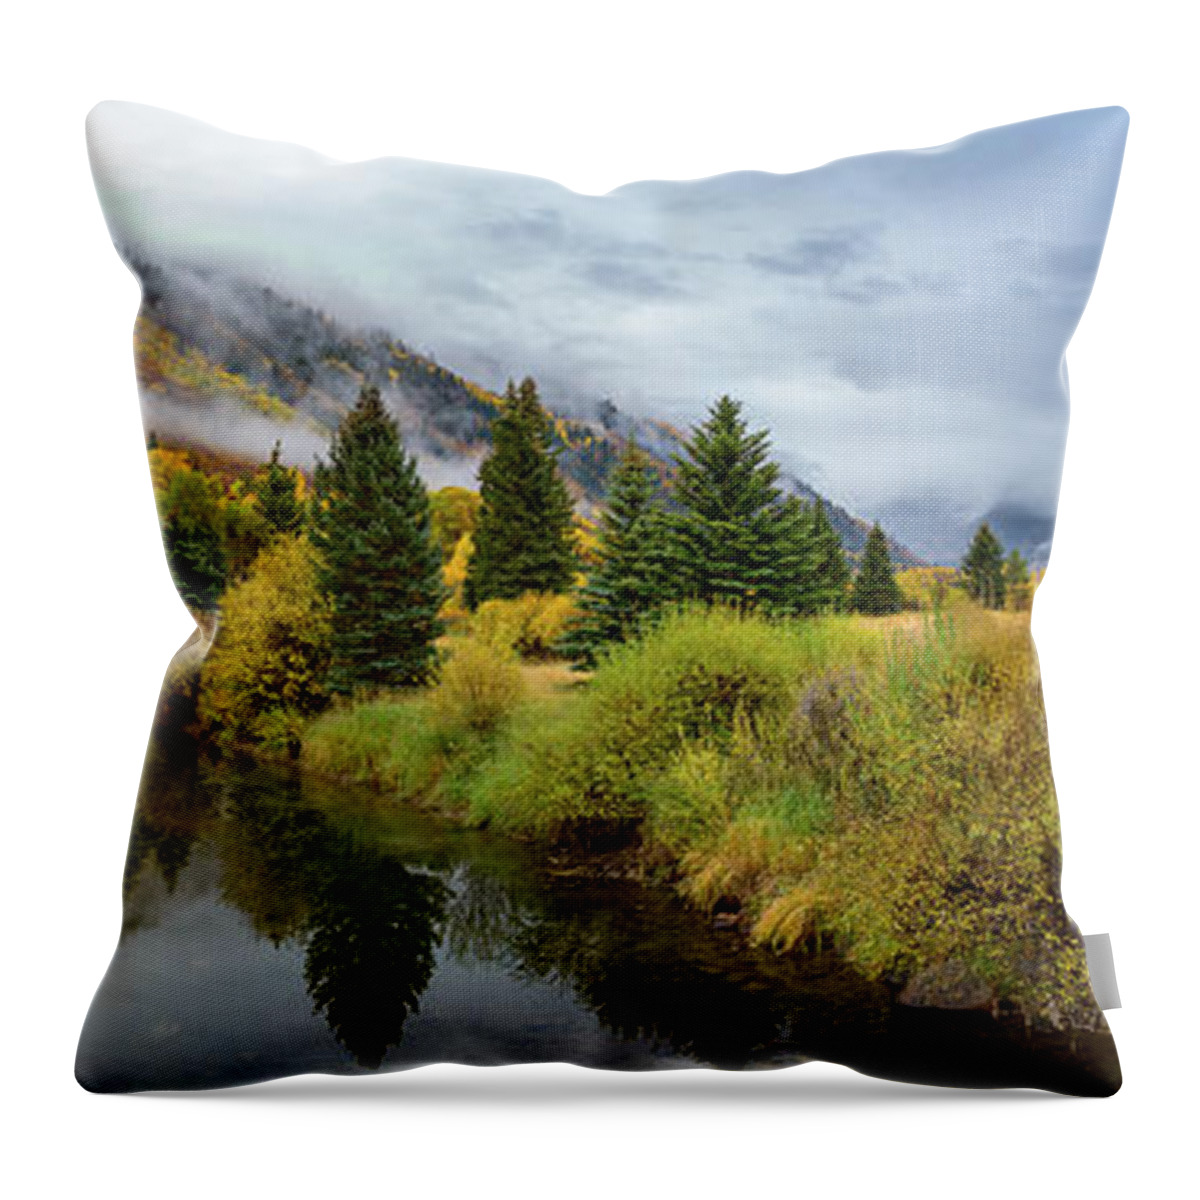 Colorado Throw Pillow featuring the photograph Golden Valley by Tim Stanley